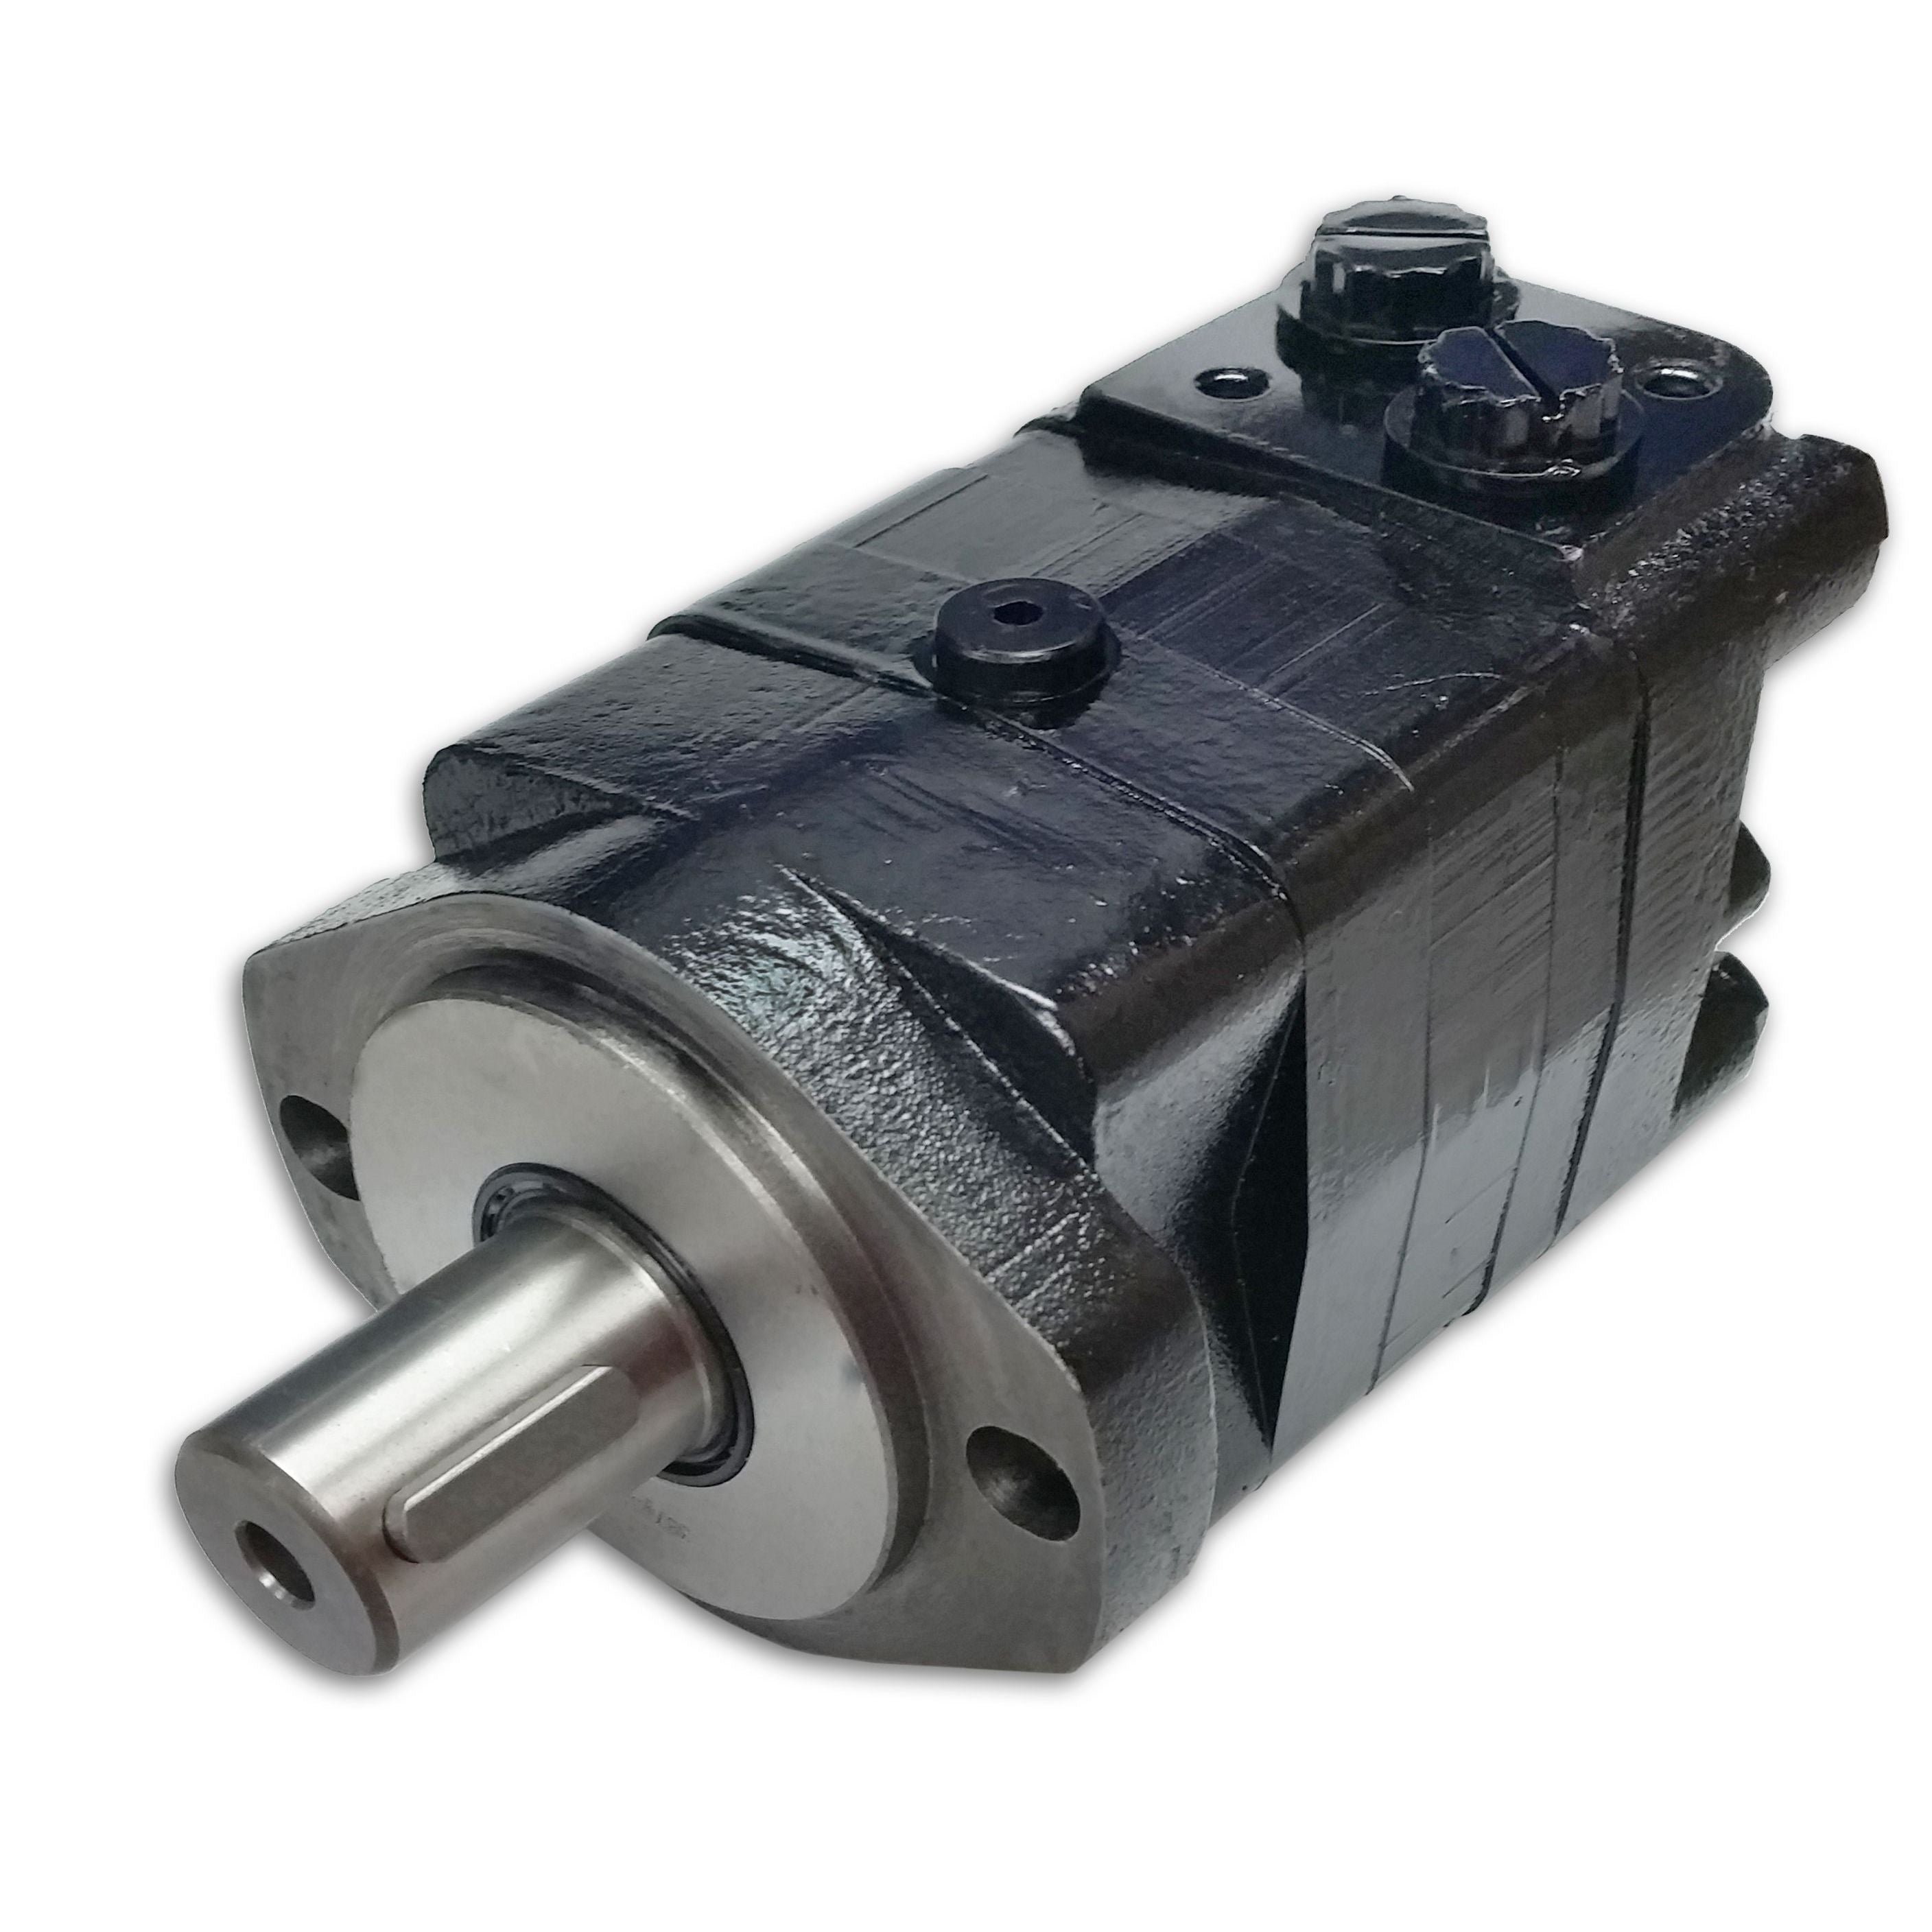 BMSY-160-E2-G-S : Dynamic LSHT Motor, 154cc, 470RPM, 4292in-lb, 3045psi Differential, 19.81GPM, SAE A 2-Bolt Mount, 1.25" Bore x 5/16" Key Shaft, Side Ported, #10 SAE (5/8")